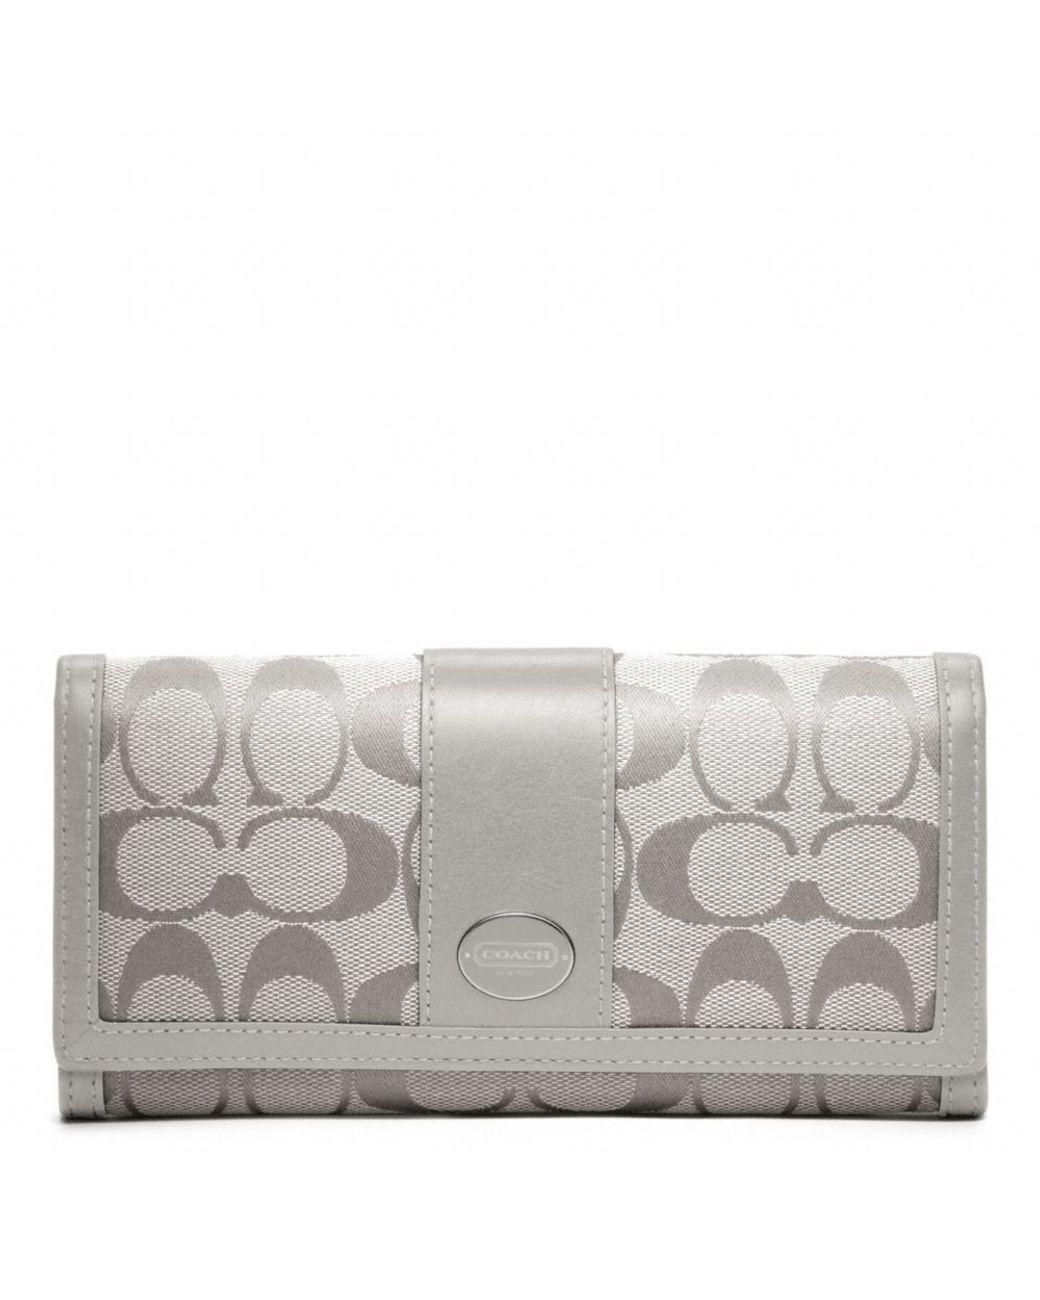 COACH Legacy Phone Wristlet in Signature Fabric in Gray